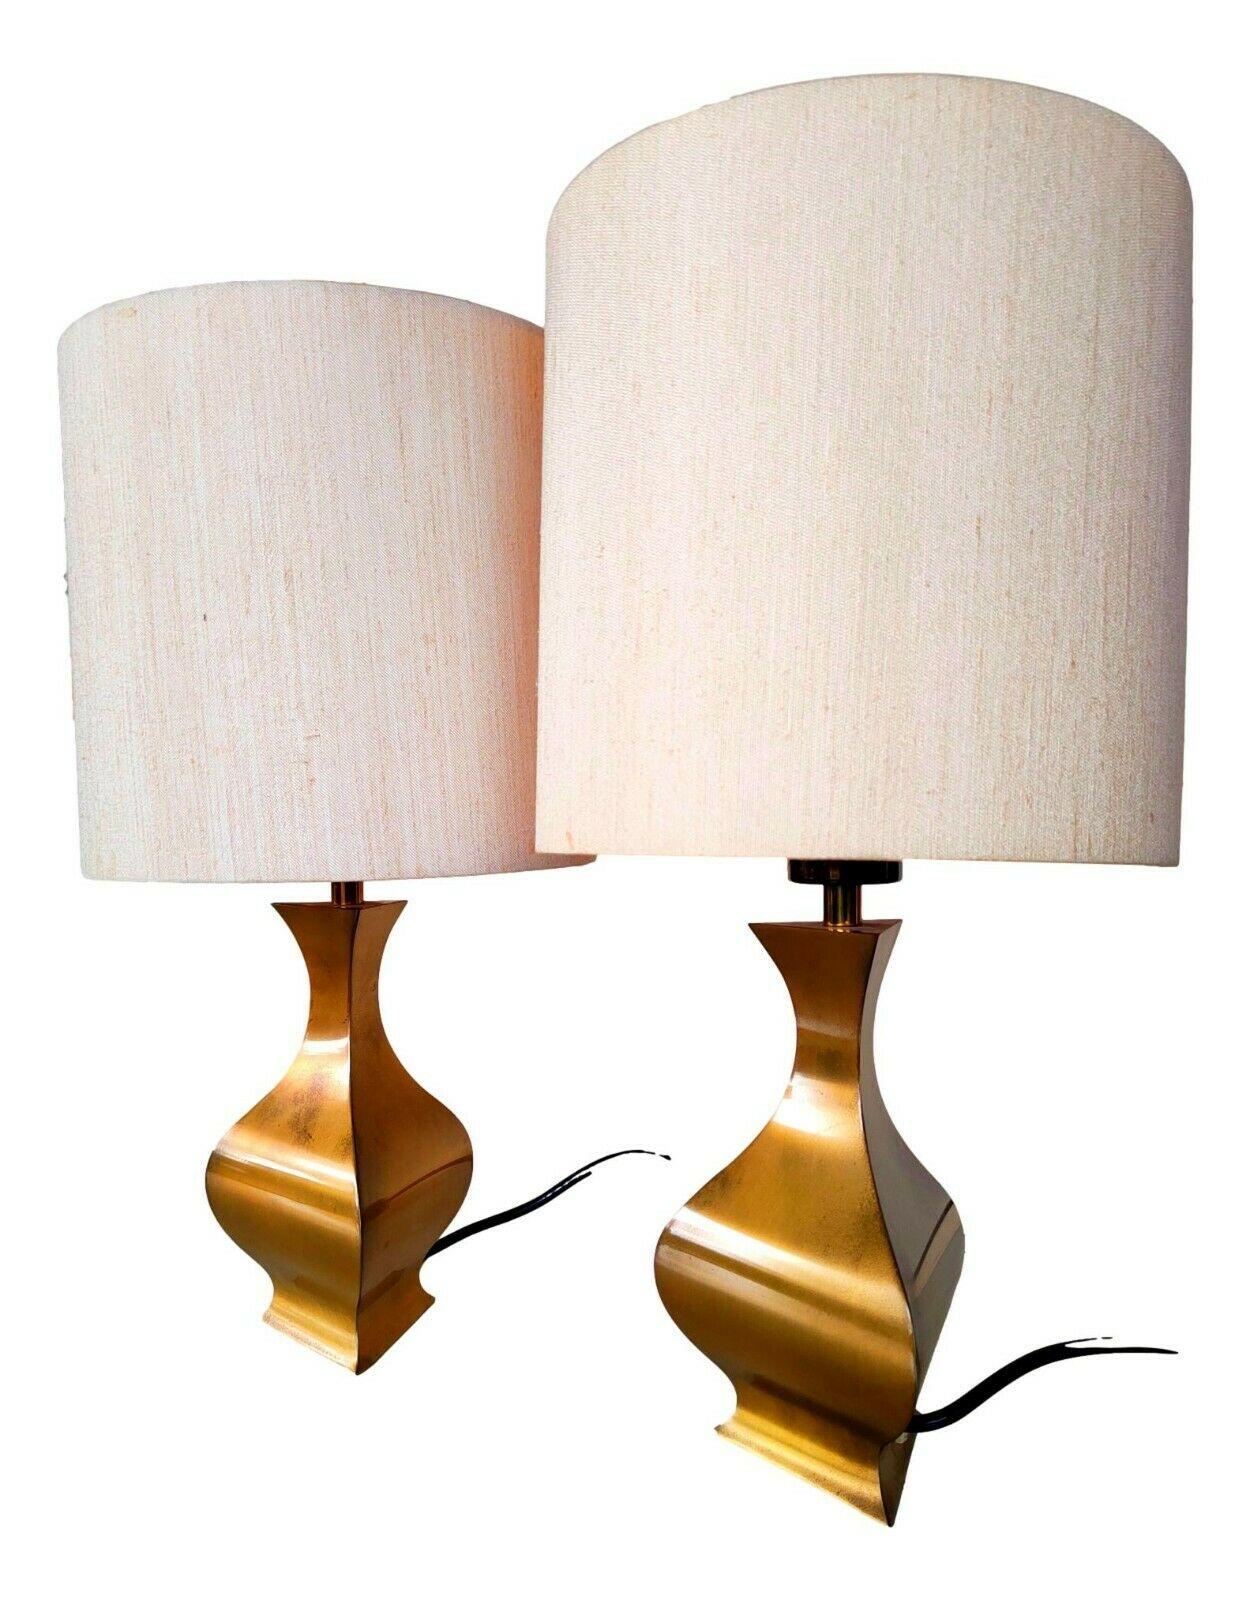 Pair of table lamps design A. Montagna Grillo A. Tonello for High Society, 1970s For Sale 2